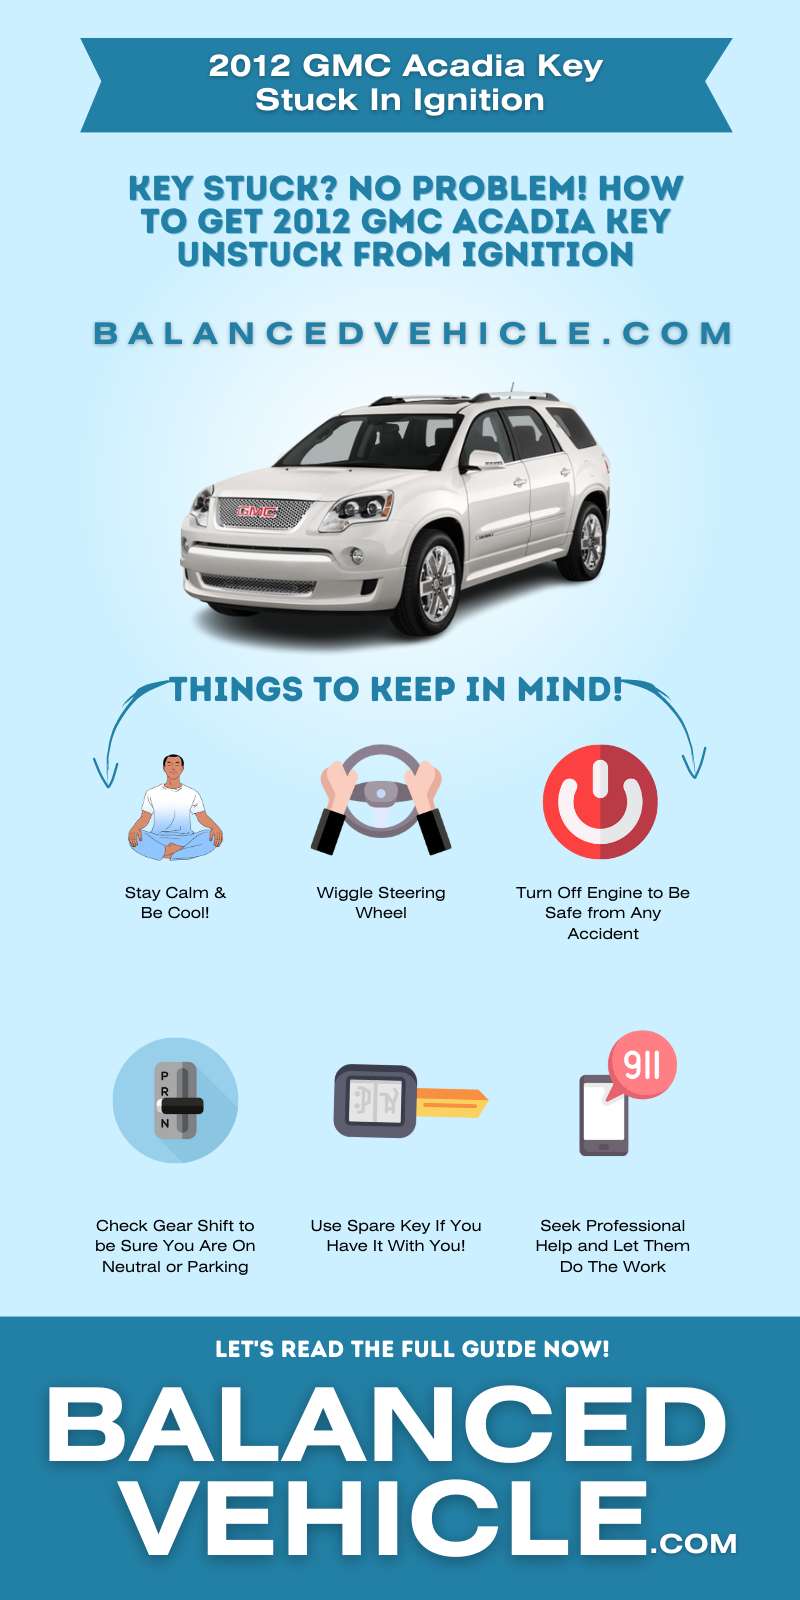 2012 GMC Acadia Key Stuck In Ignition infographic guided by BalancedVehicle.com